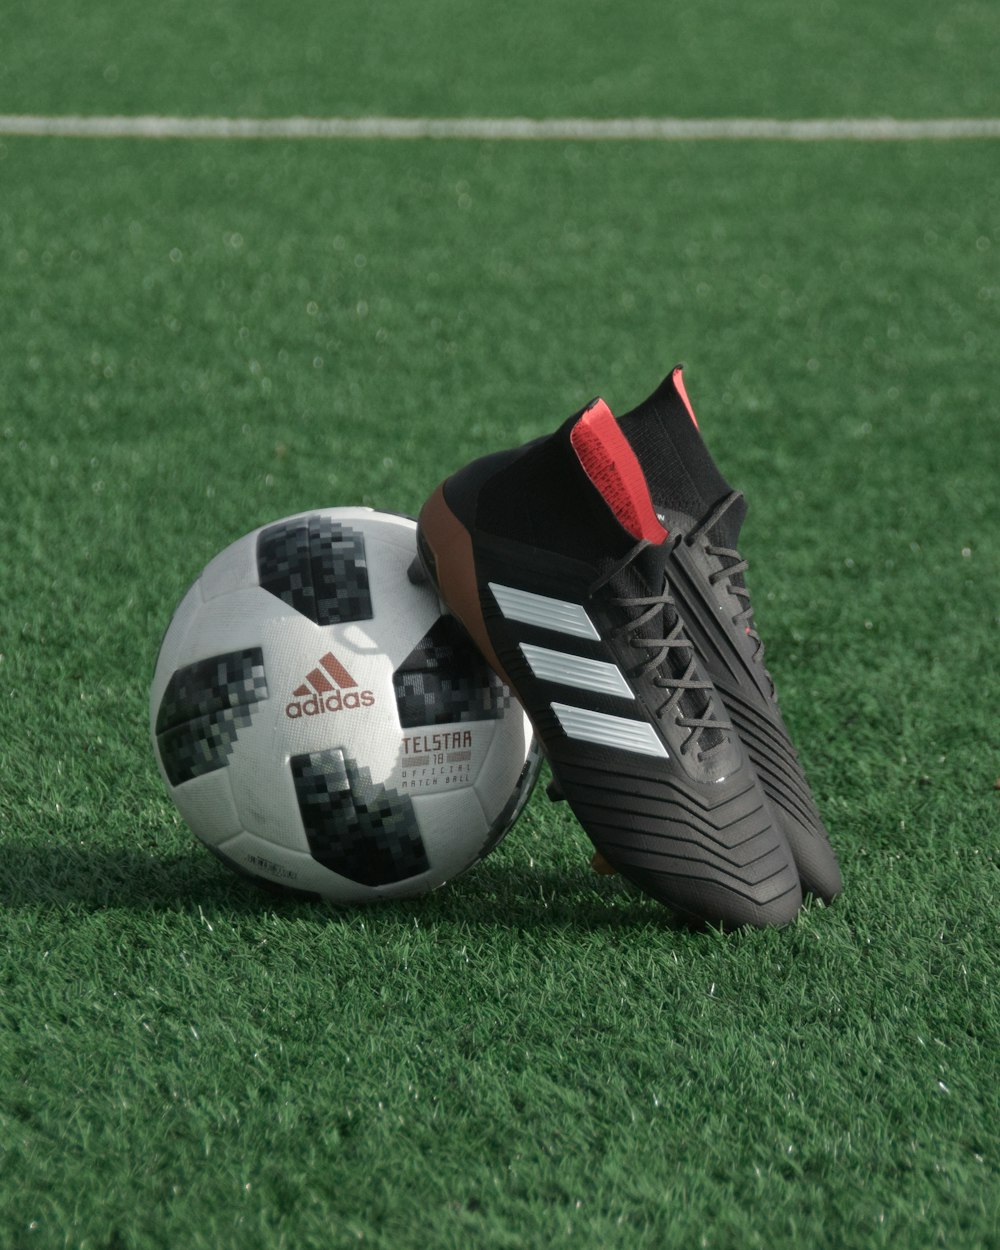 black adidas cleats lean on white and black adidas soccer ball on green  grass photo – Free Football Image on Unsplash